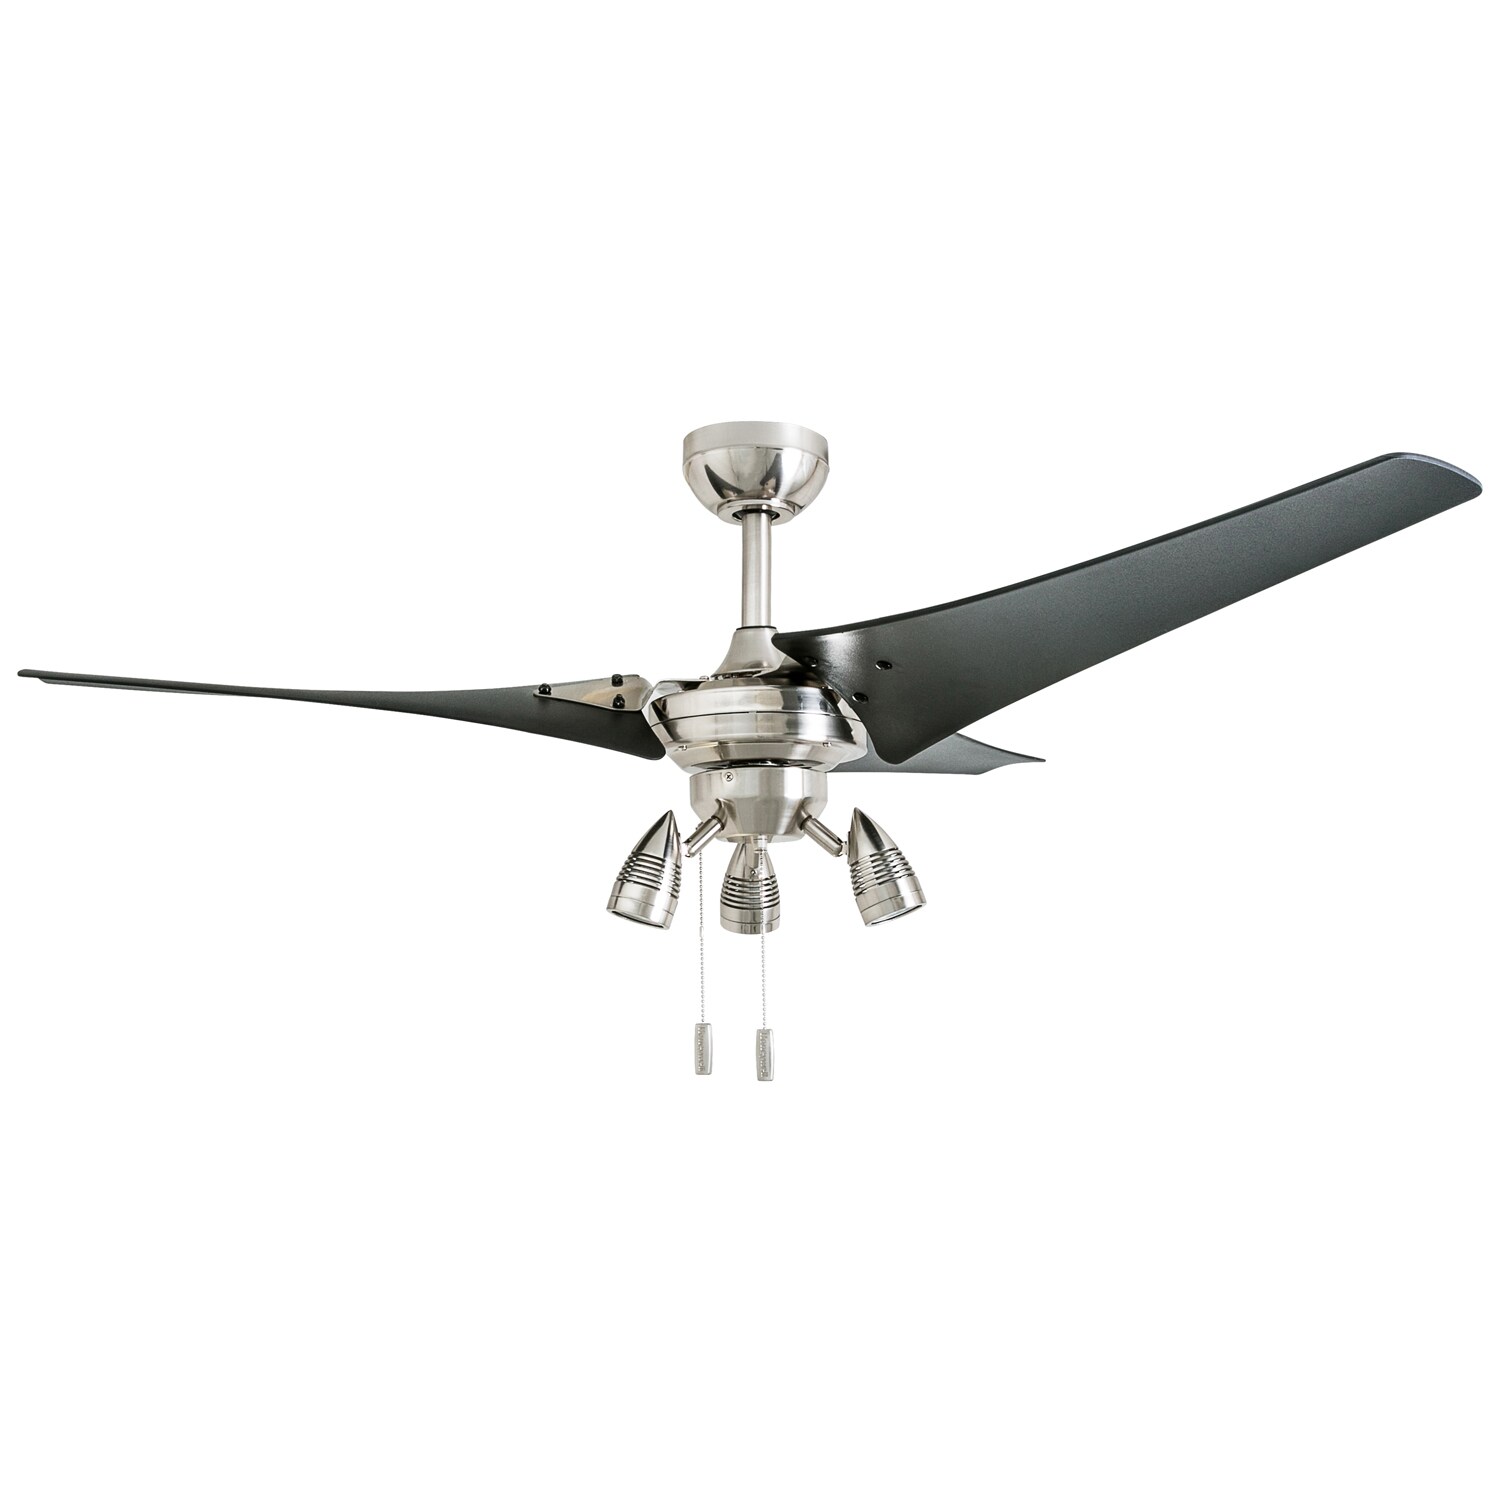 Brushed Nickel Honeywell Ceiling Fans 50611-01 High Power Ceiling Fan LED 56 Industrial 3 Black ABS Blades 